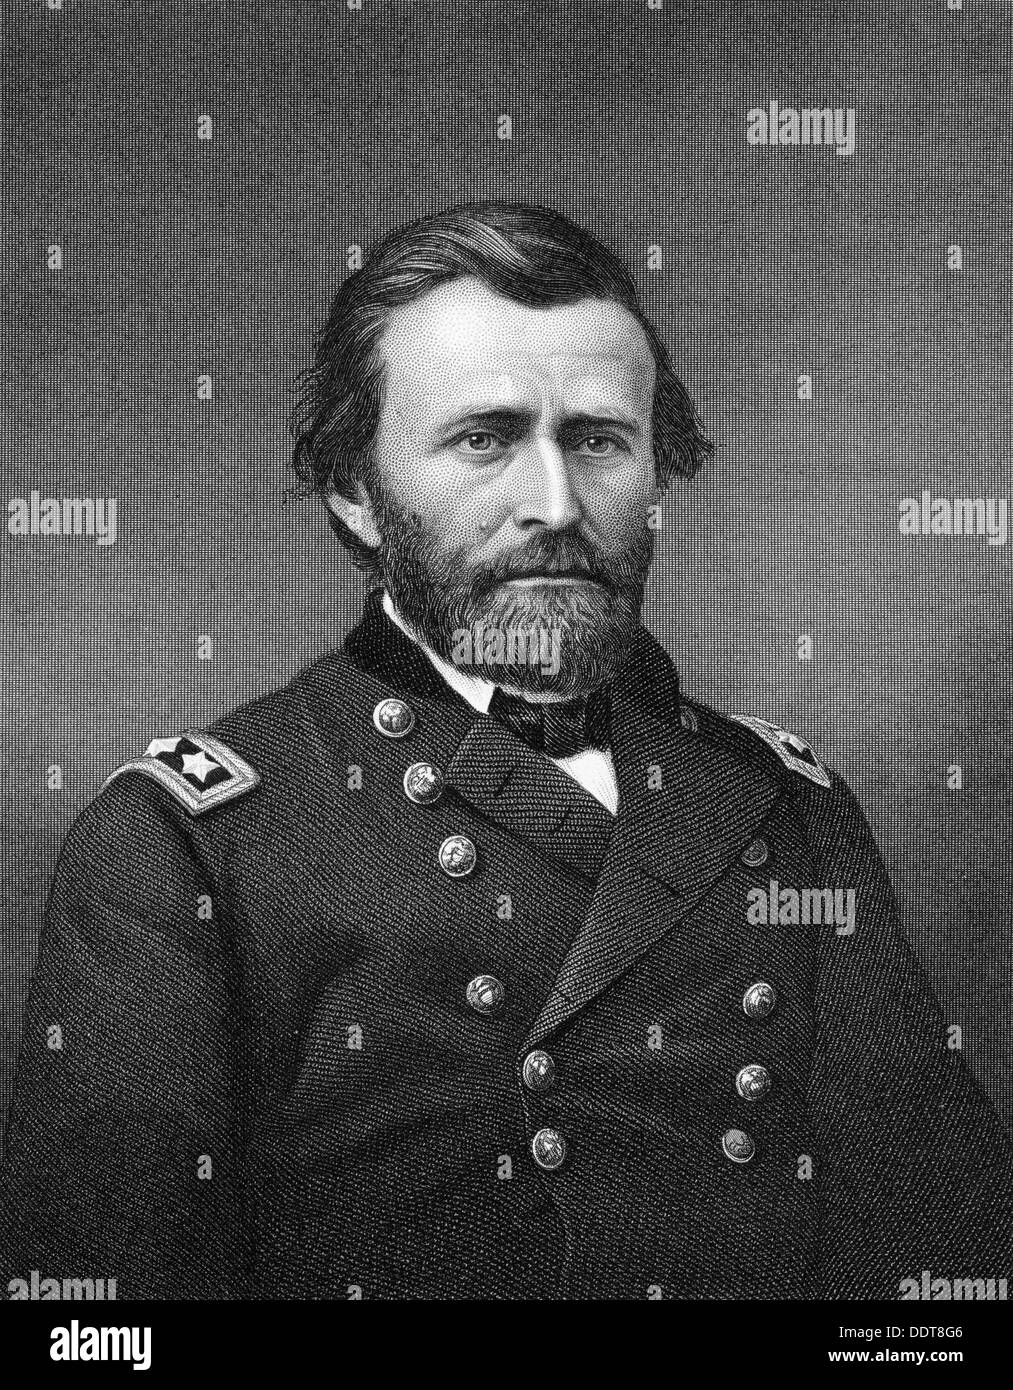 Ulysses S Grant, American general and 18th President of the United States, 19th century. Artist: Robert E Whitechurch Stock Photo